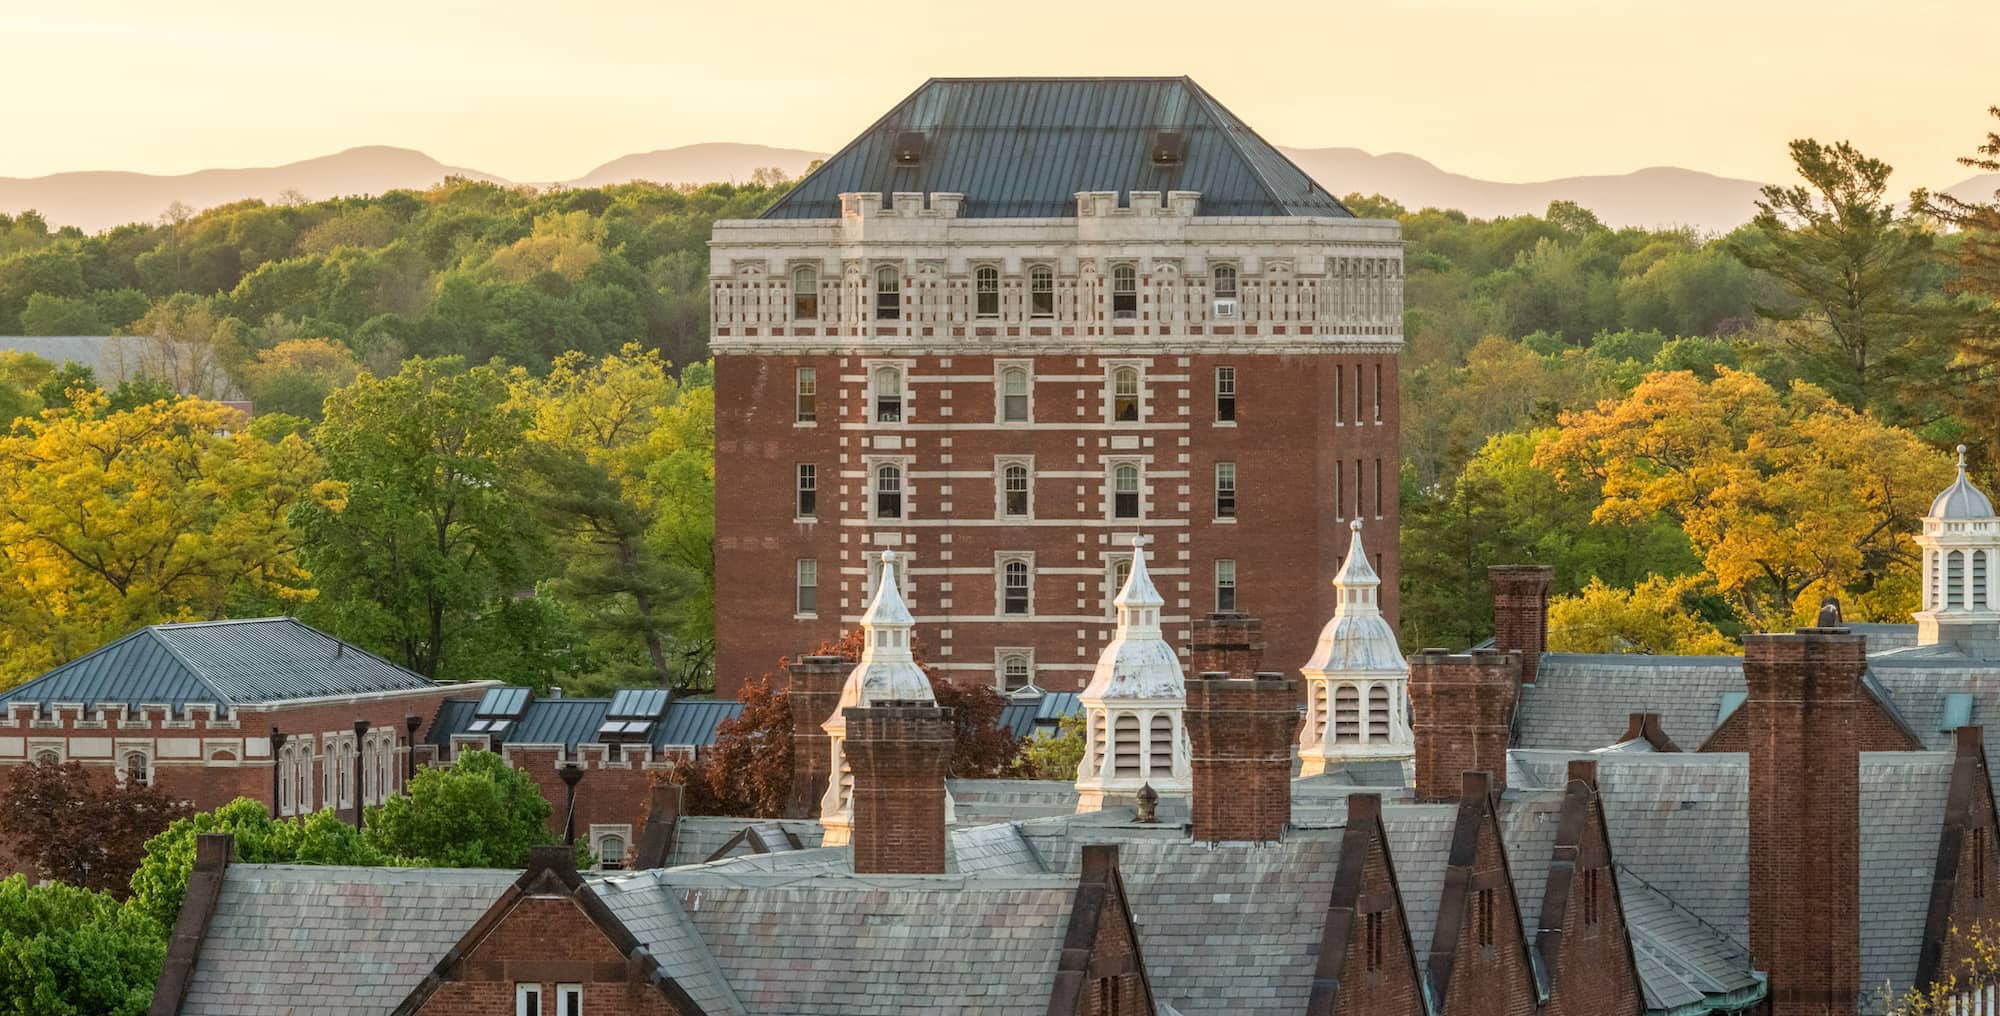 An aerial view of the top of Jewett building on the Vassar campus, a large multi-story red brick building with many windows, surrounded by greenery, with the rooftops of other buildings in front of it.